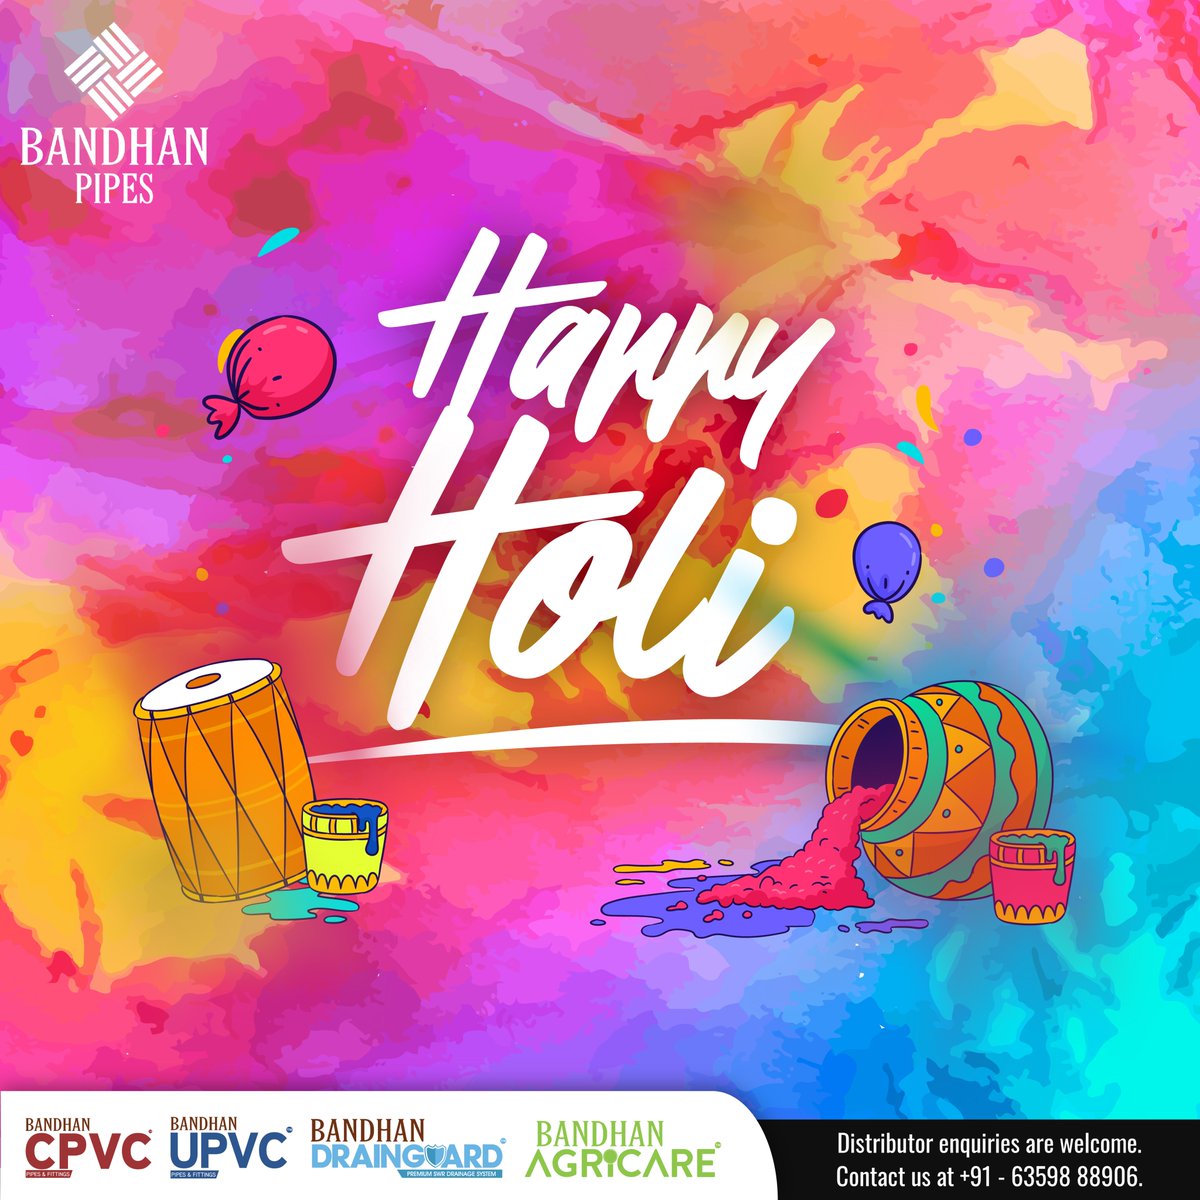 Let the colors of Holi spread the message of peace and happiness. Wishing you all a vibrant and joyous Holi! 🎨🌈 . . #HappyHoli #FestivalOfColors #bandhanpipes #drainguard #SochoBandhanPipes #pipes #plumbing #pvc #pvcpipes #industry #cpvc #upvc #swr #waterpipes #water